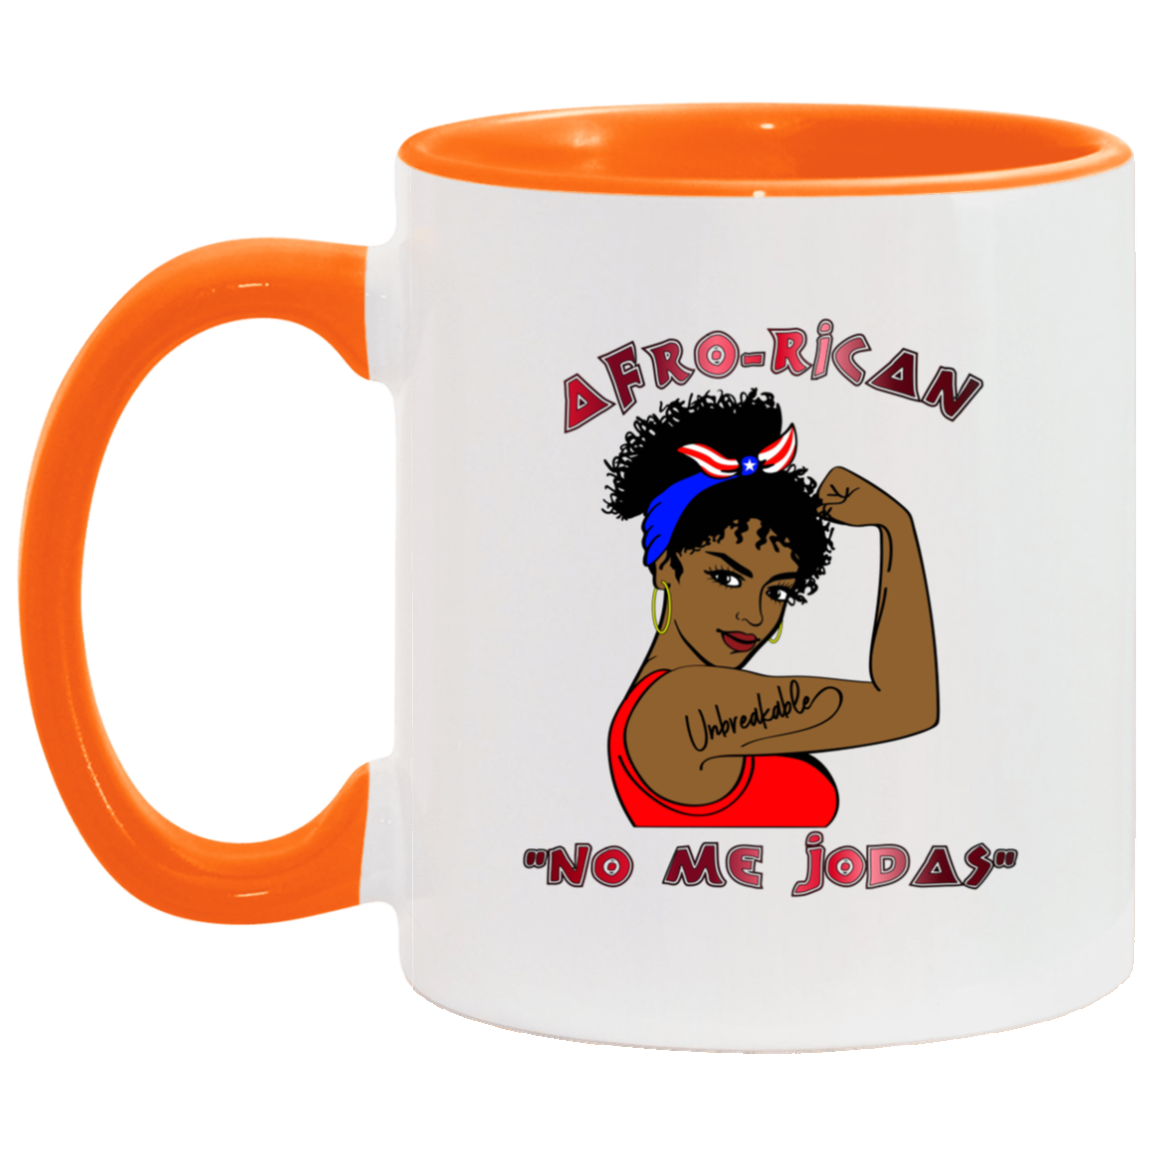 Afro-Rican "Don't Fck With Me" 11 oz. Accent Mug